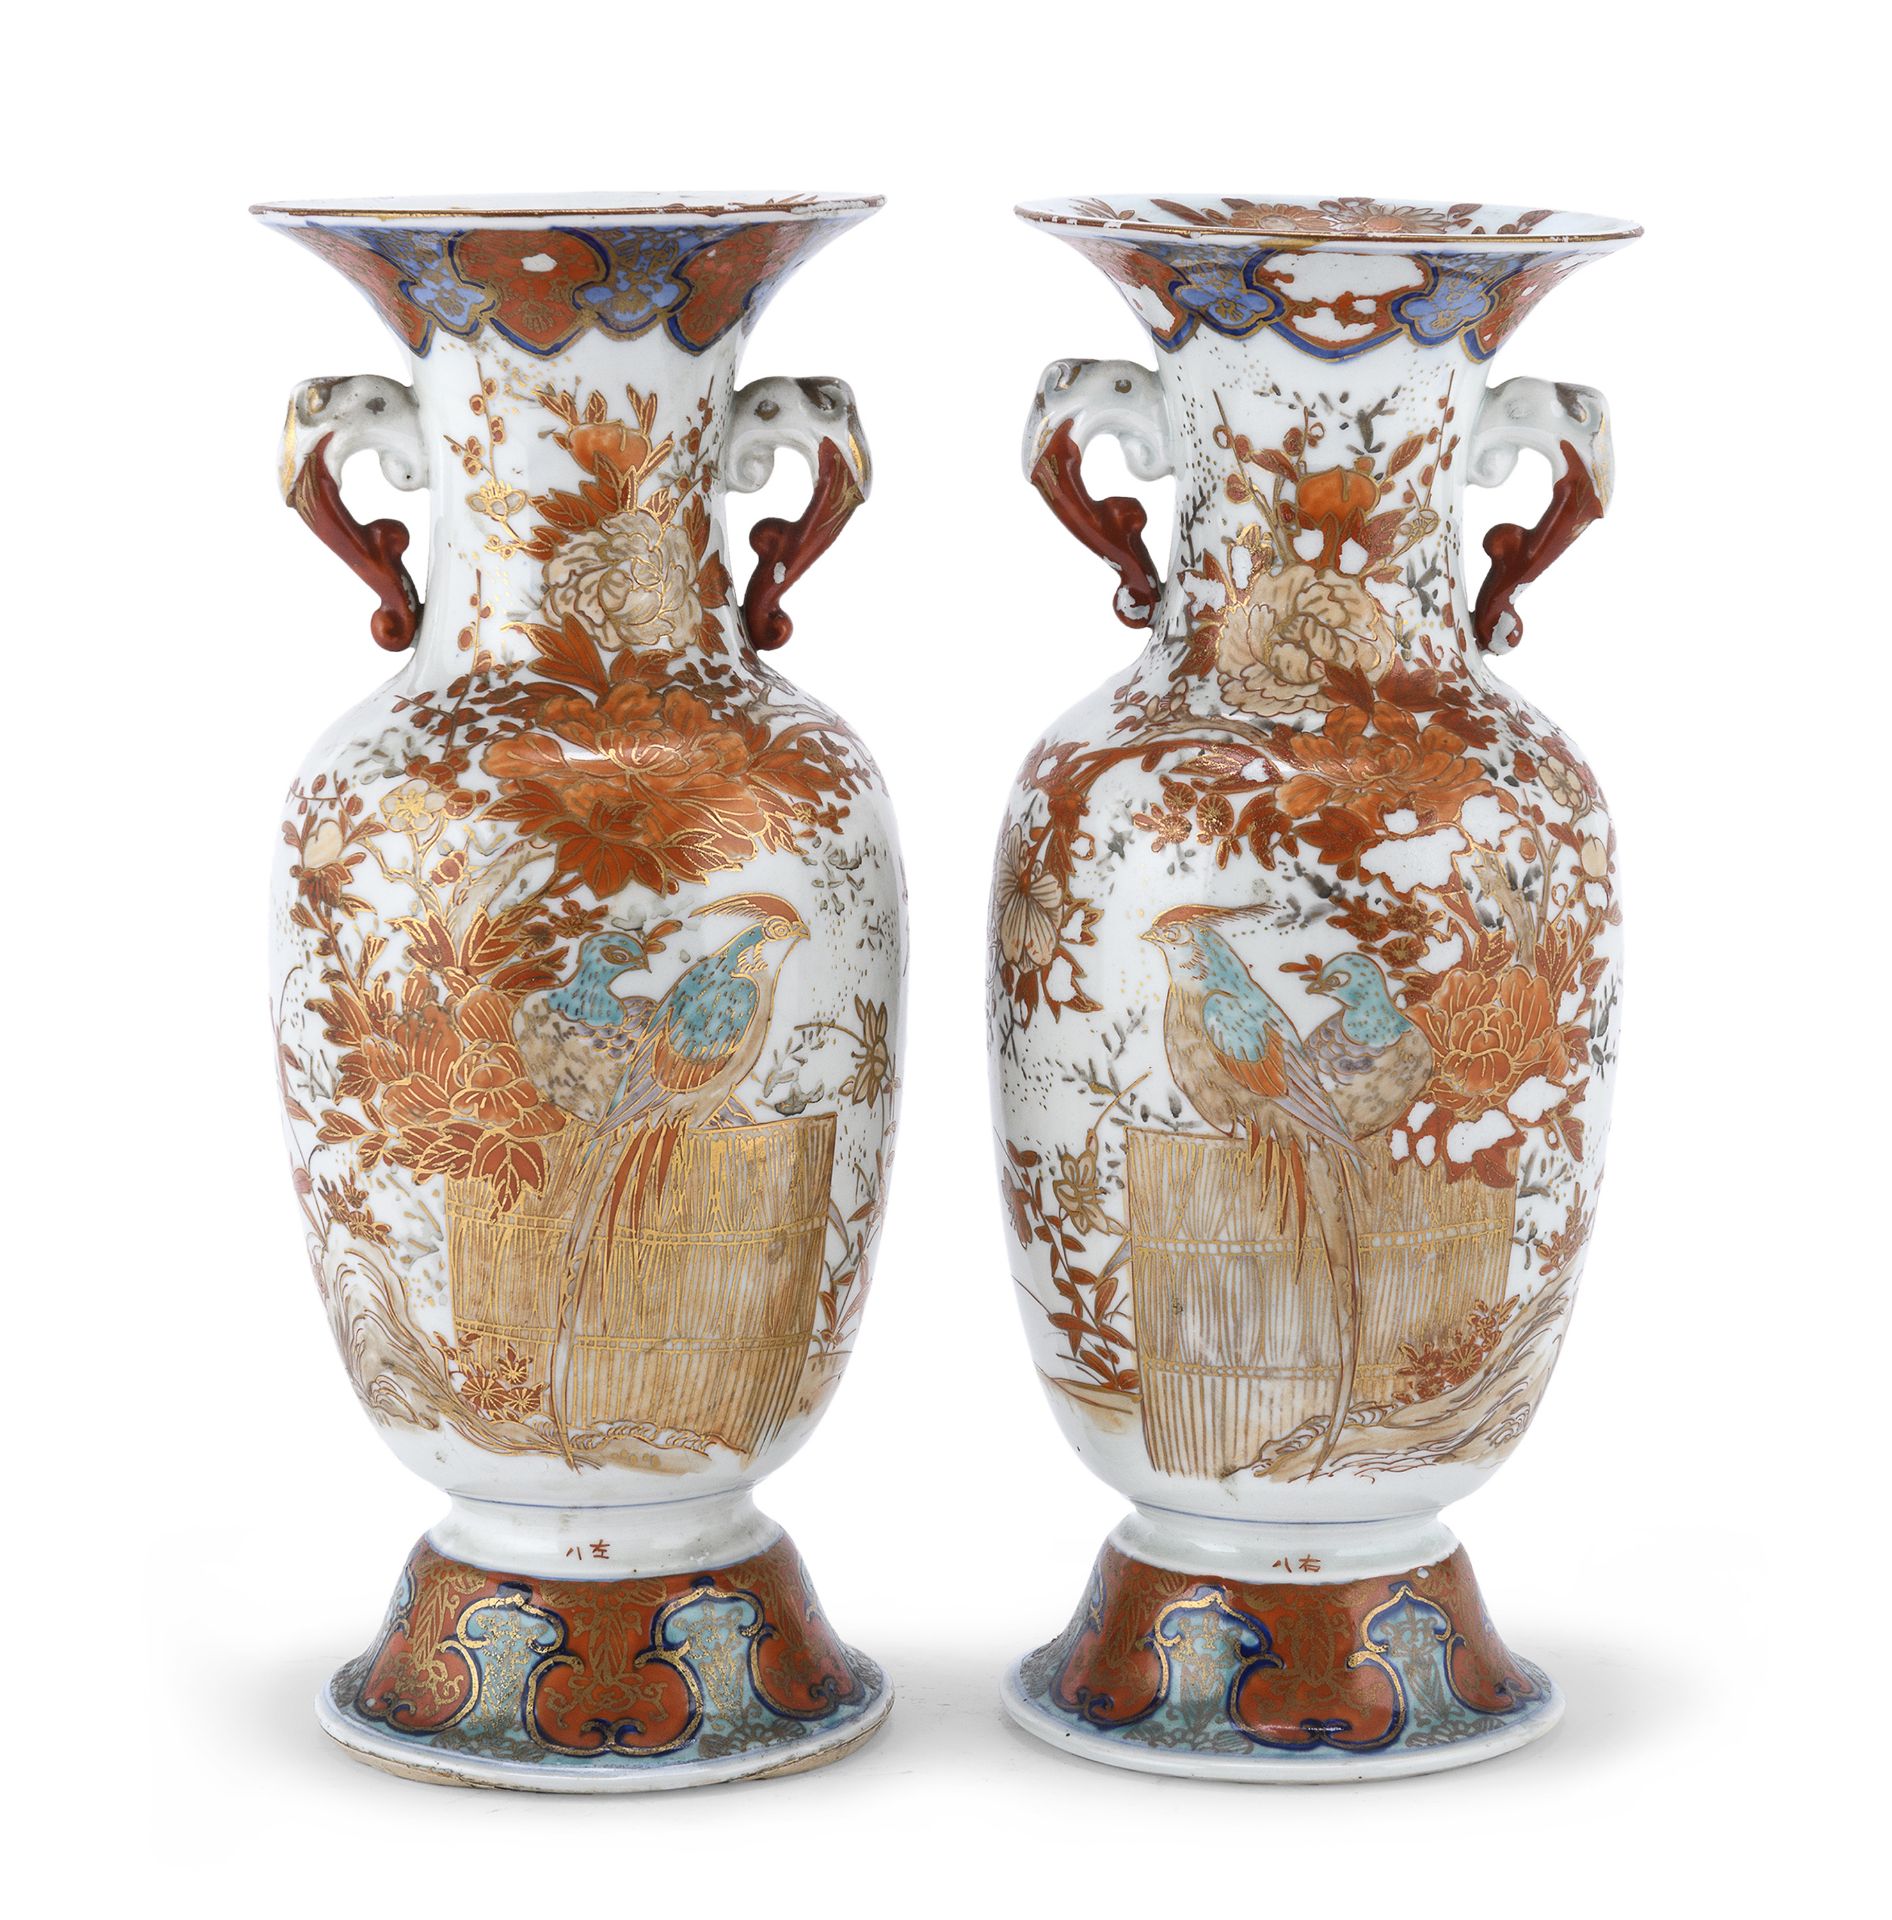 A PAIR OF JAPANESE POLYCHROME AND GOLD ENAMELED PORCELAIN VASES EARLY 20TH CENTURY.